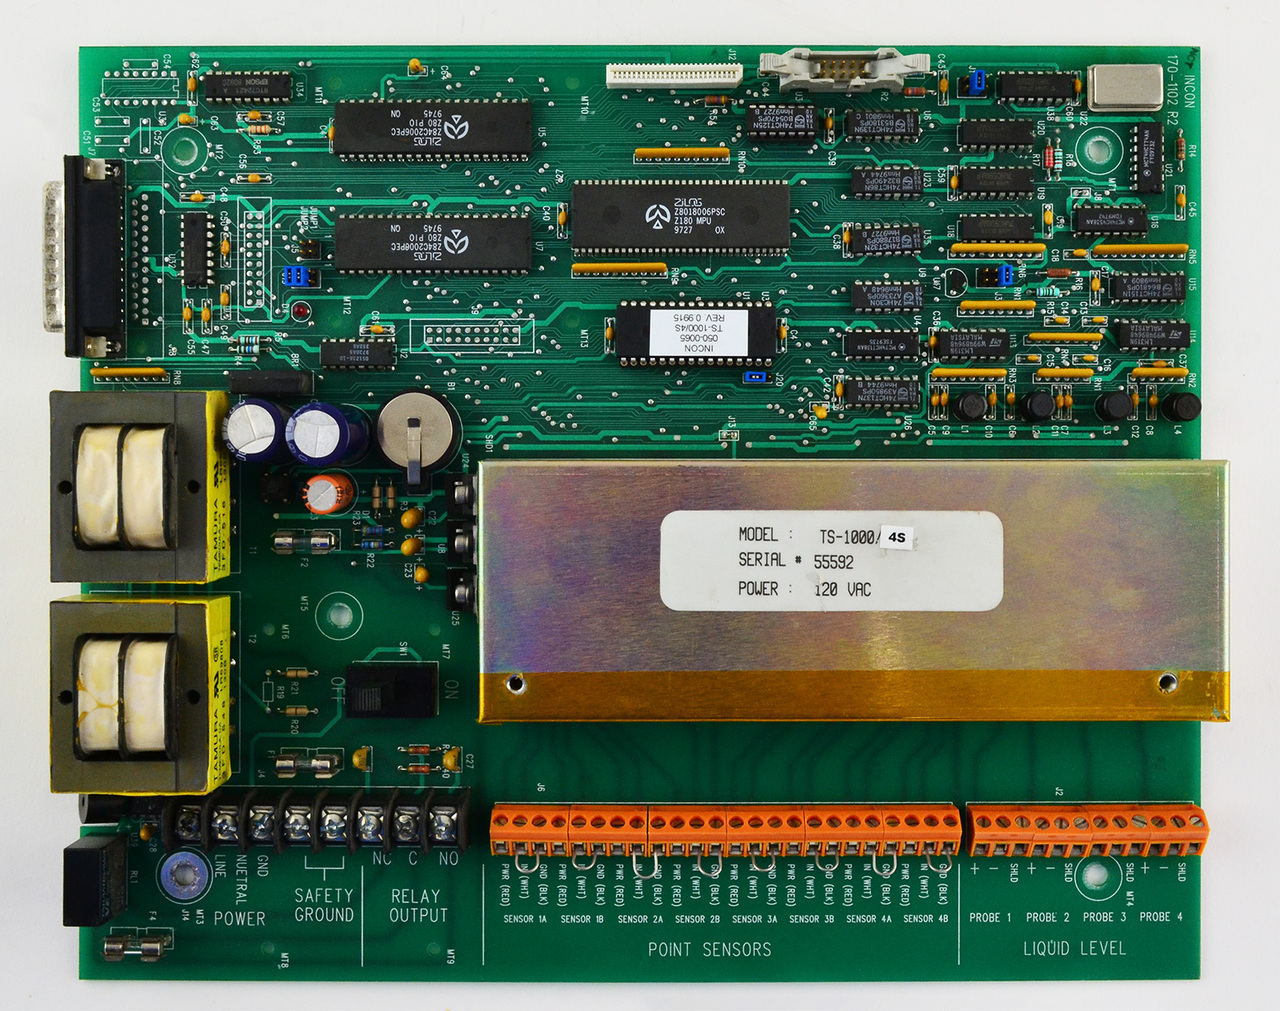 TS-1000 MAIN SYSTEM BOARD, Fits Incon Image